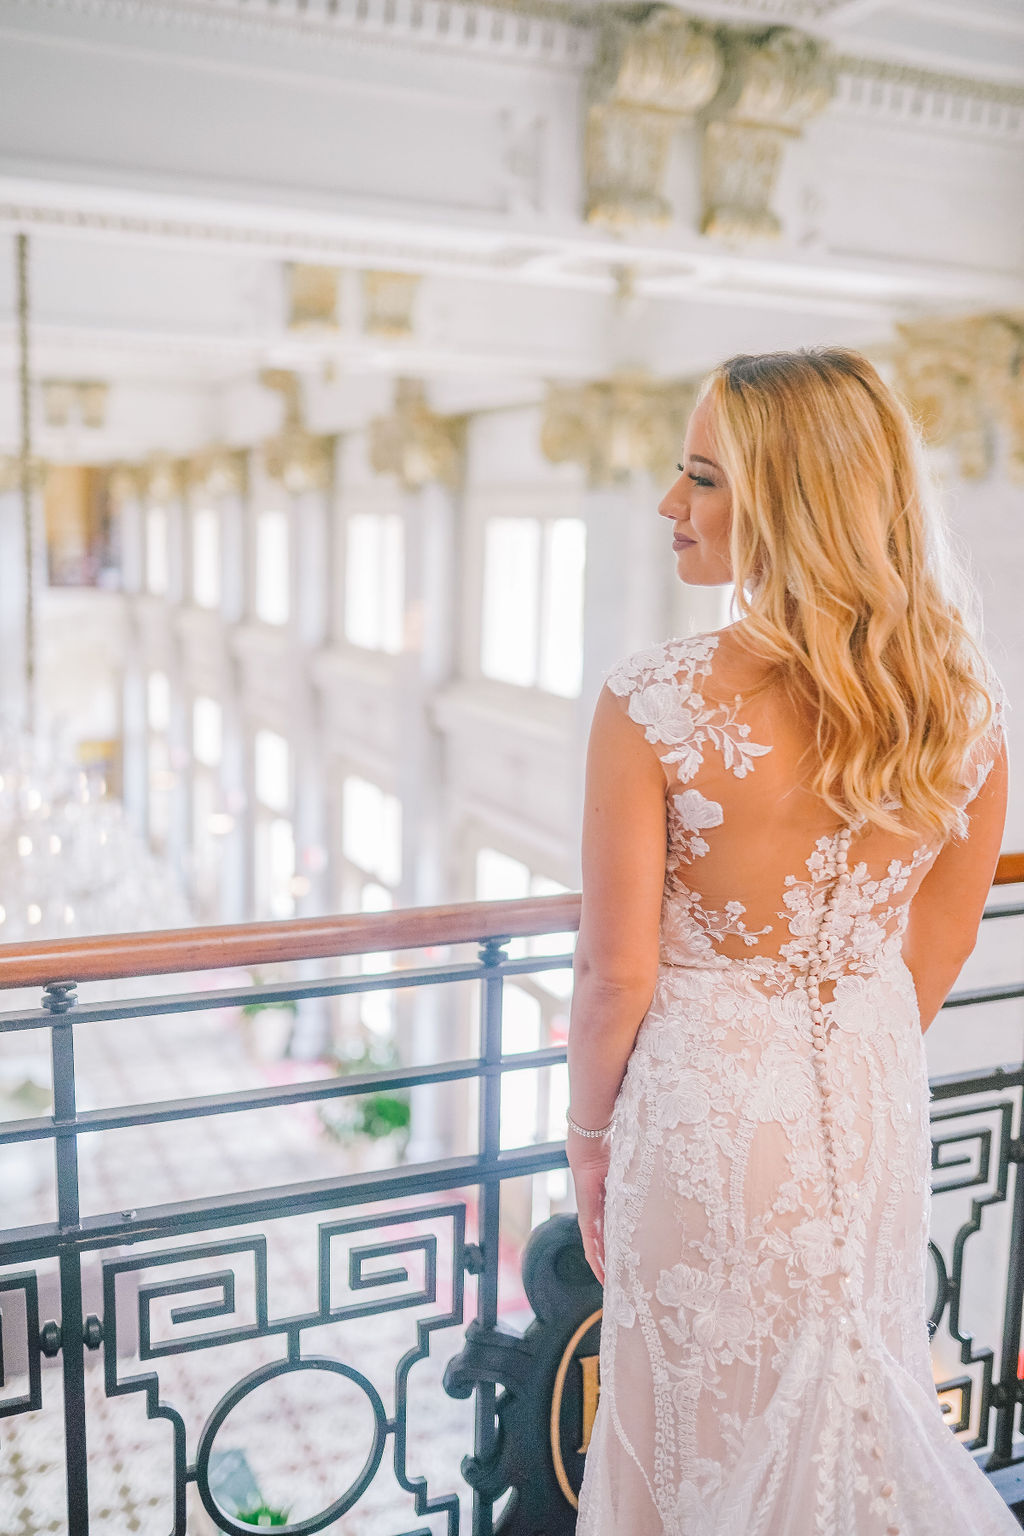 back of bride and her dress as she stands by a balcony